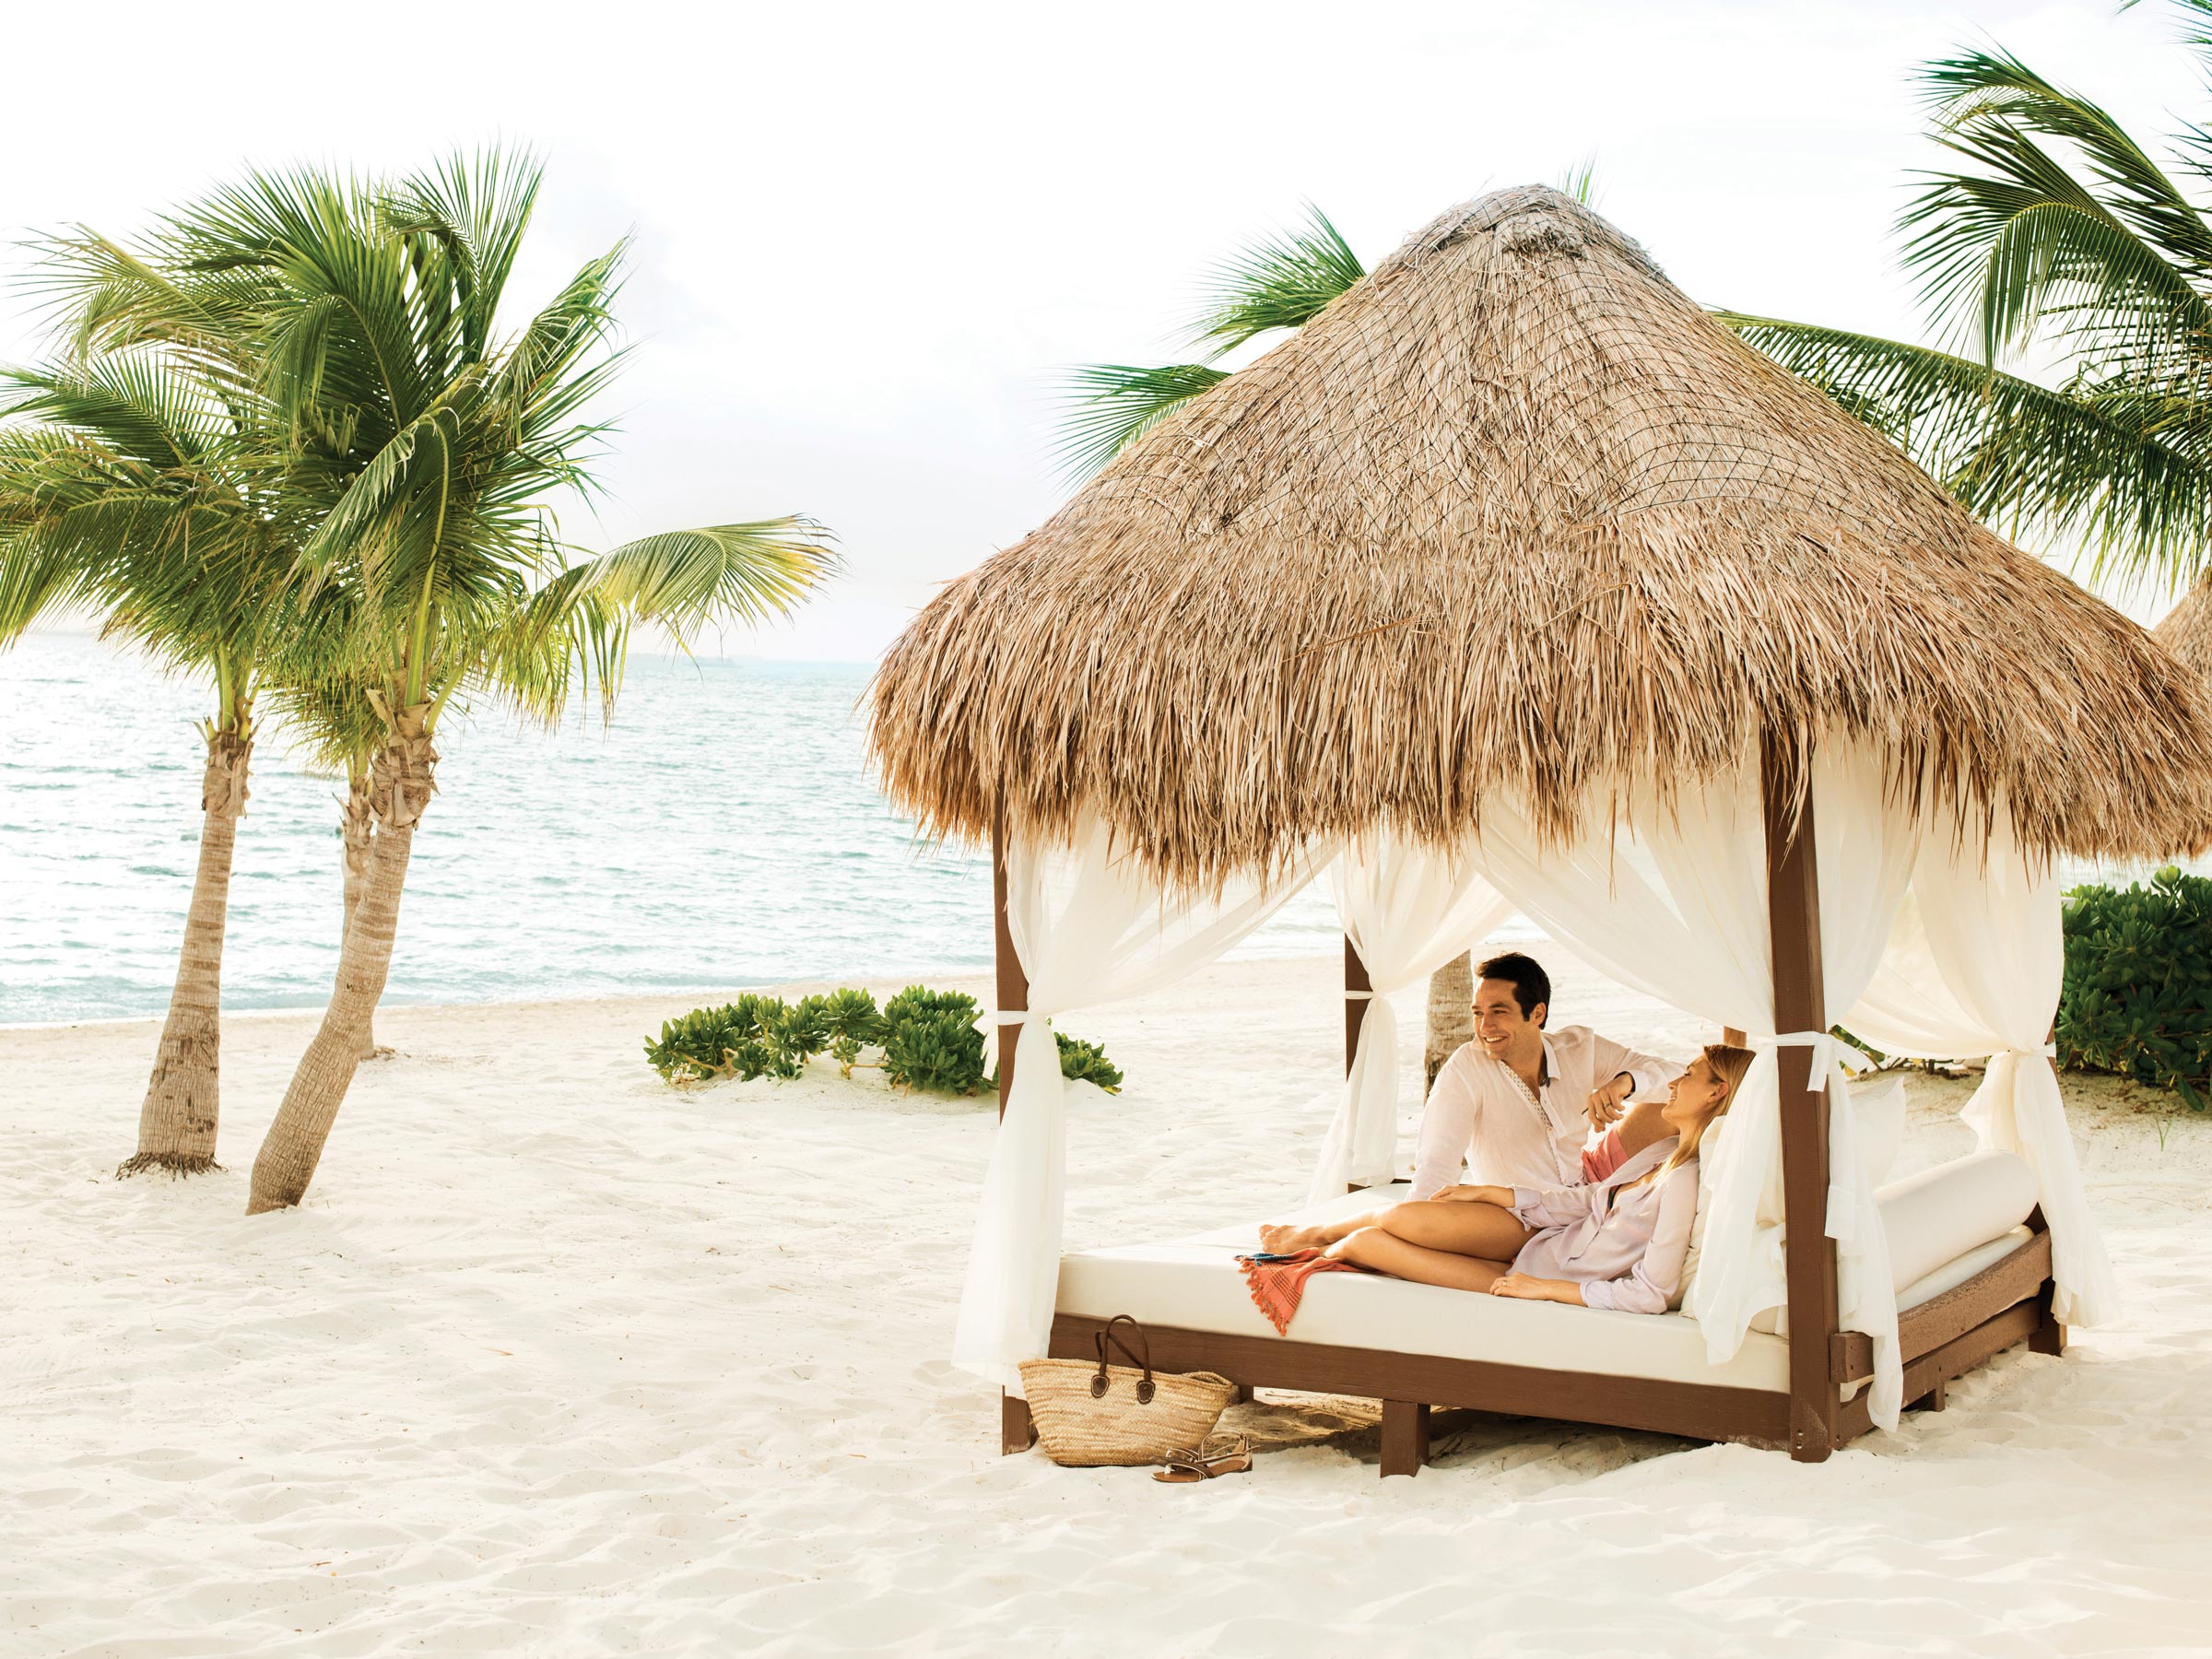 Take Advantage of our Cancun Beach Resort Discounts and Promo Codes